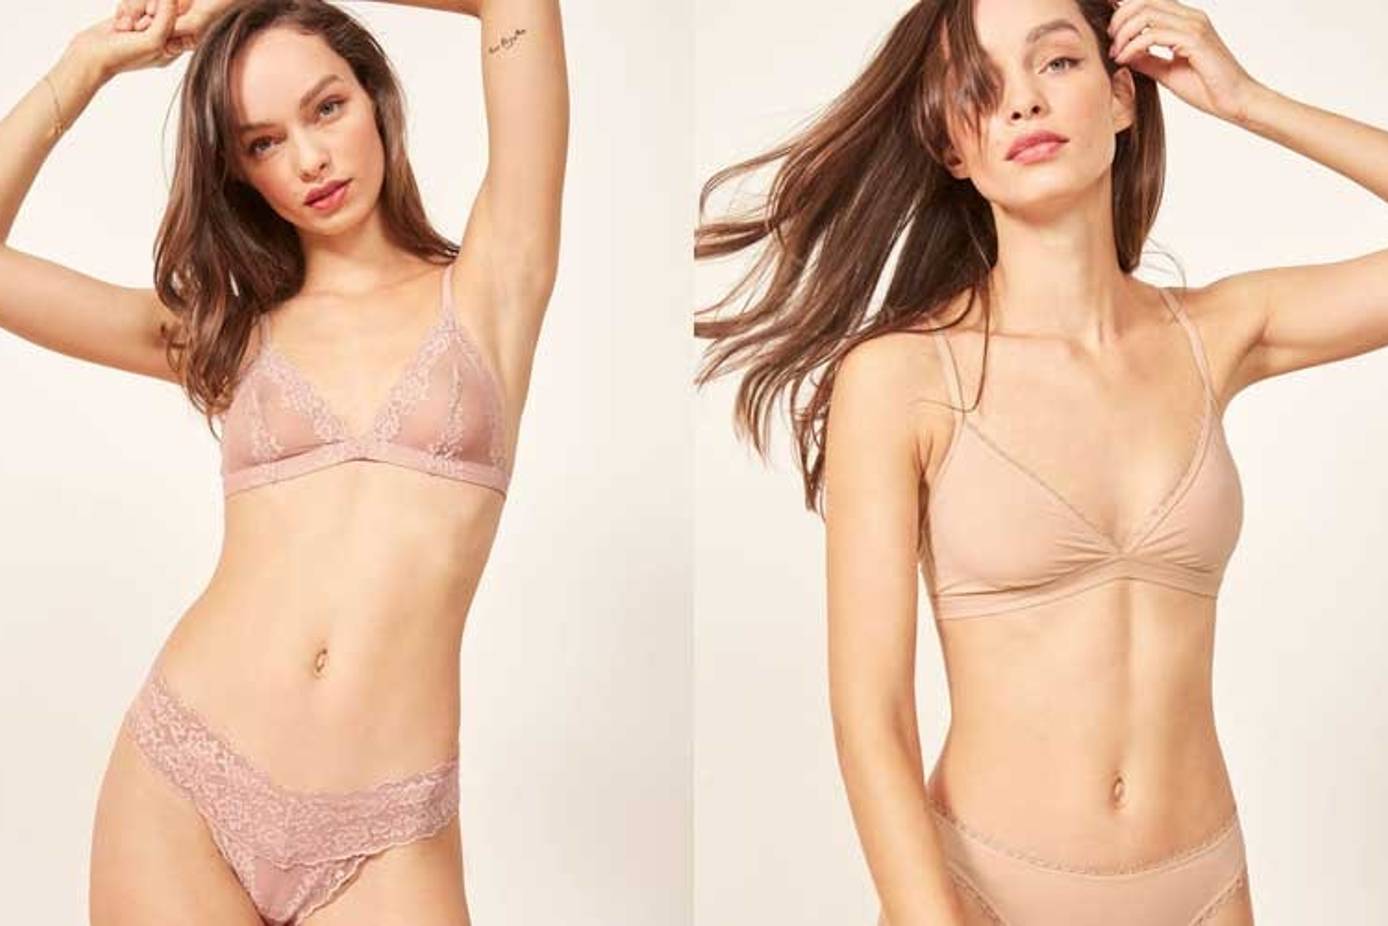 Reformation Has A Pretty New Lingerie Line